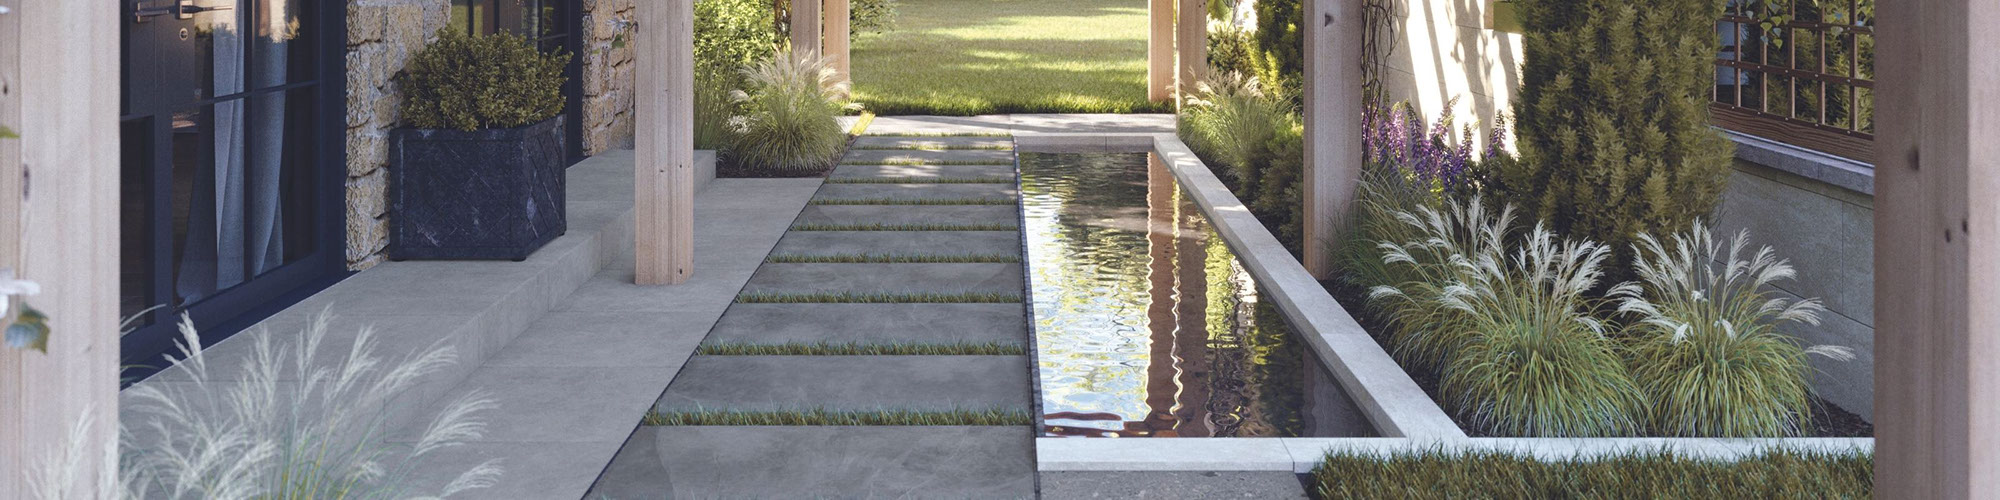 Close up of residential outdoor courtyard walkway of porcelain paver tiles set in grass, next to a coy pond.